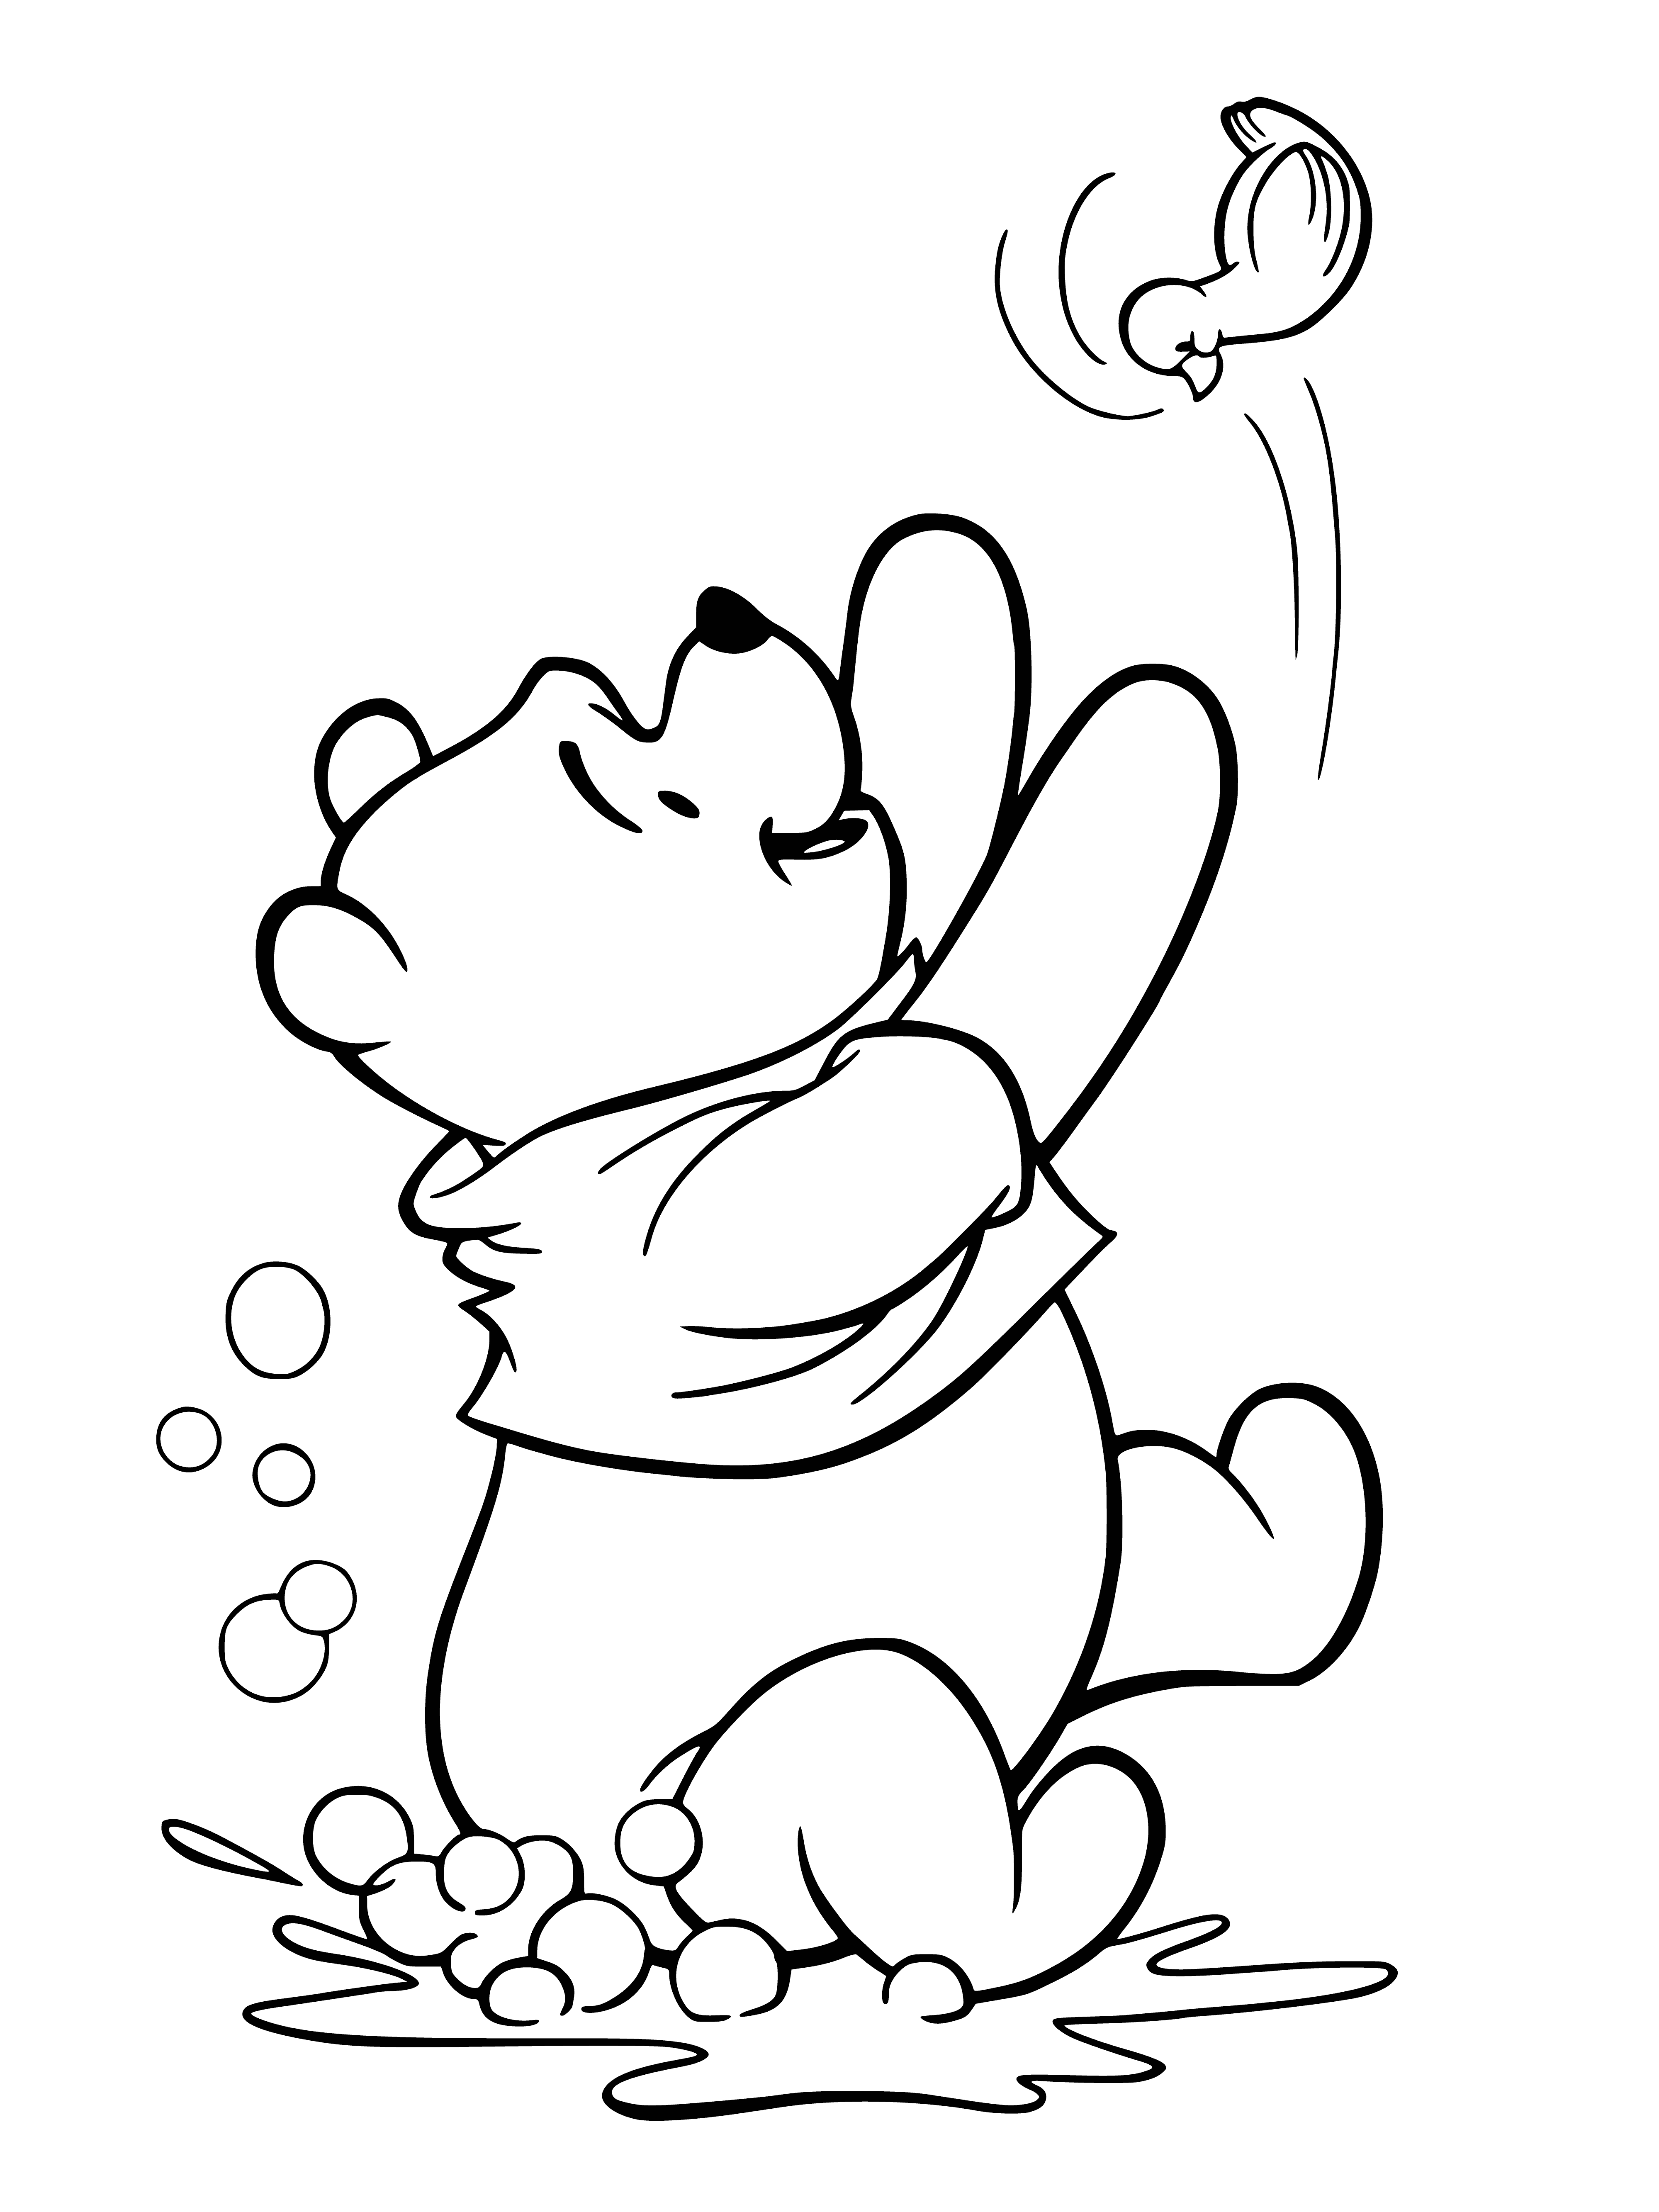 coloring page: Winnie the Pooh sits on the ground reading, pointing to something in the book, with a red balloon in his hand and a toy train by his side.